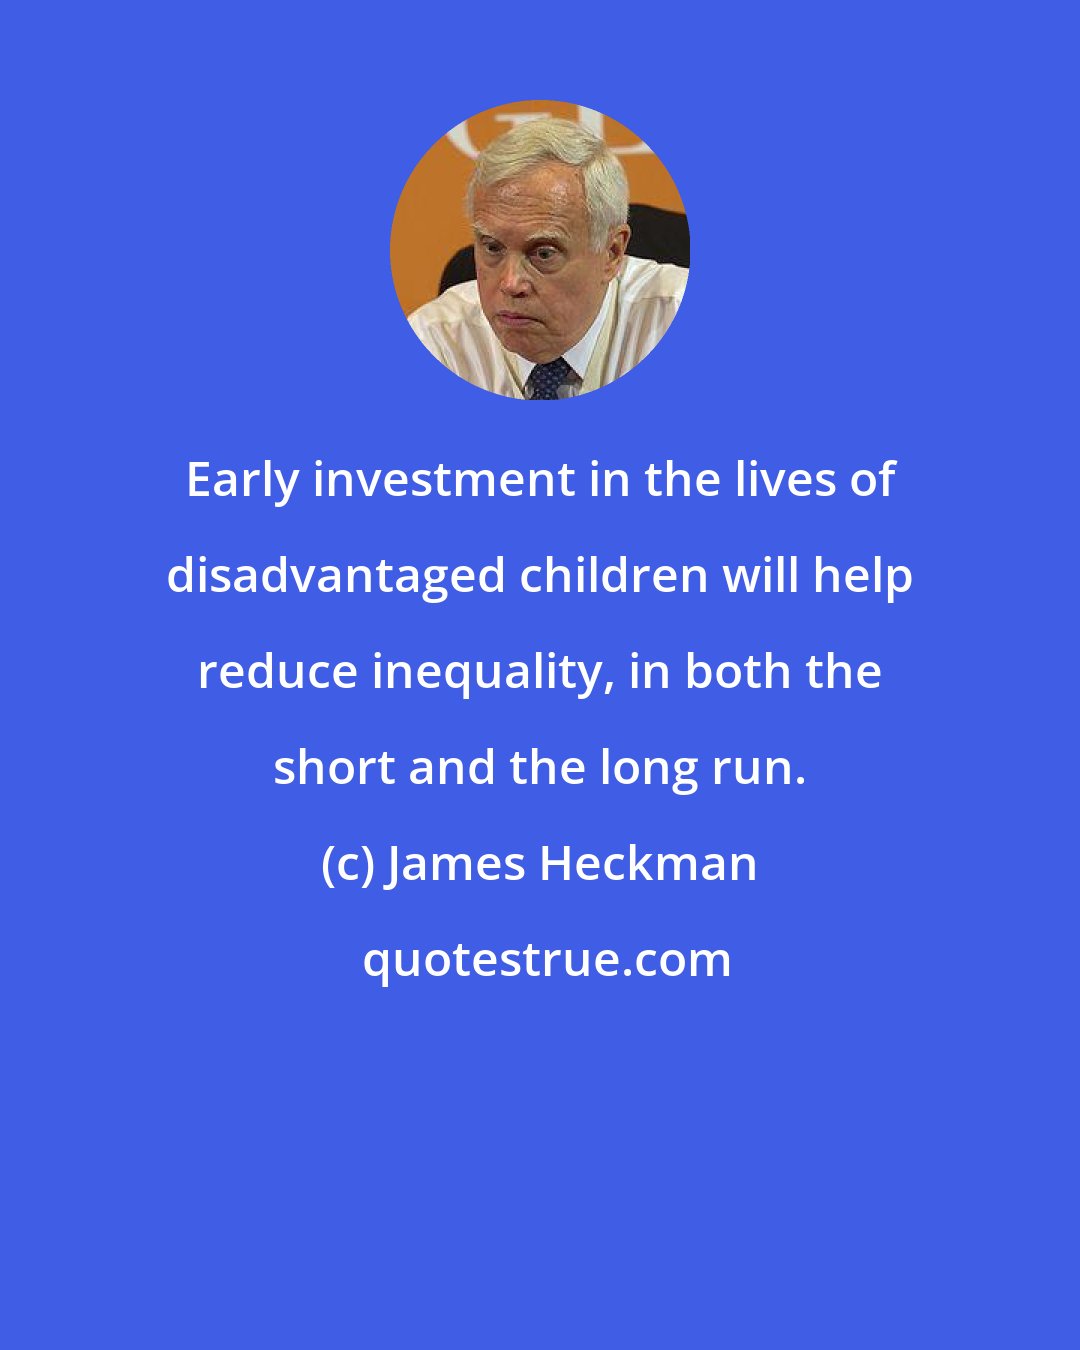 James Heckman: Early investment in the lives of disadvantaged children will help reduce inequality, in both the short and the long run.